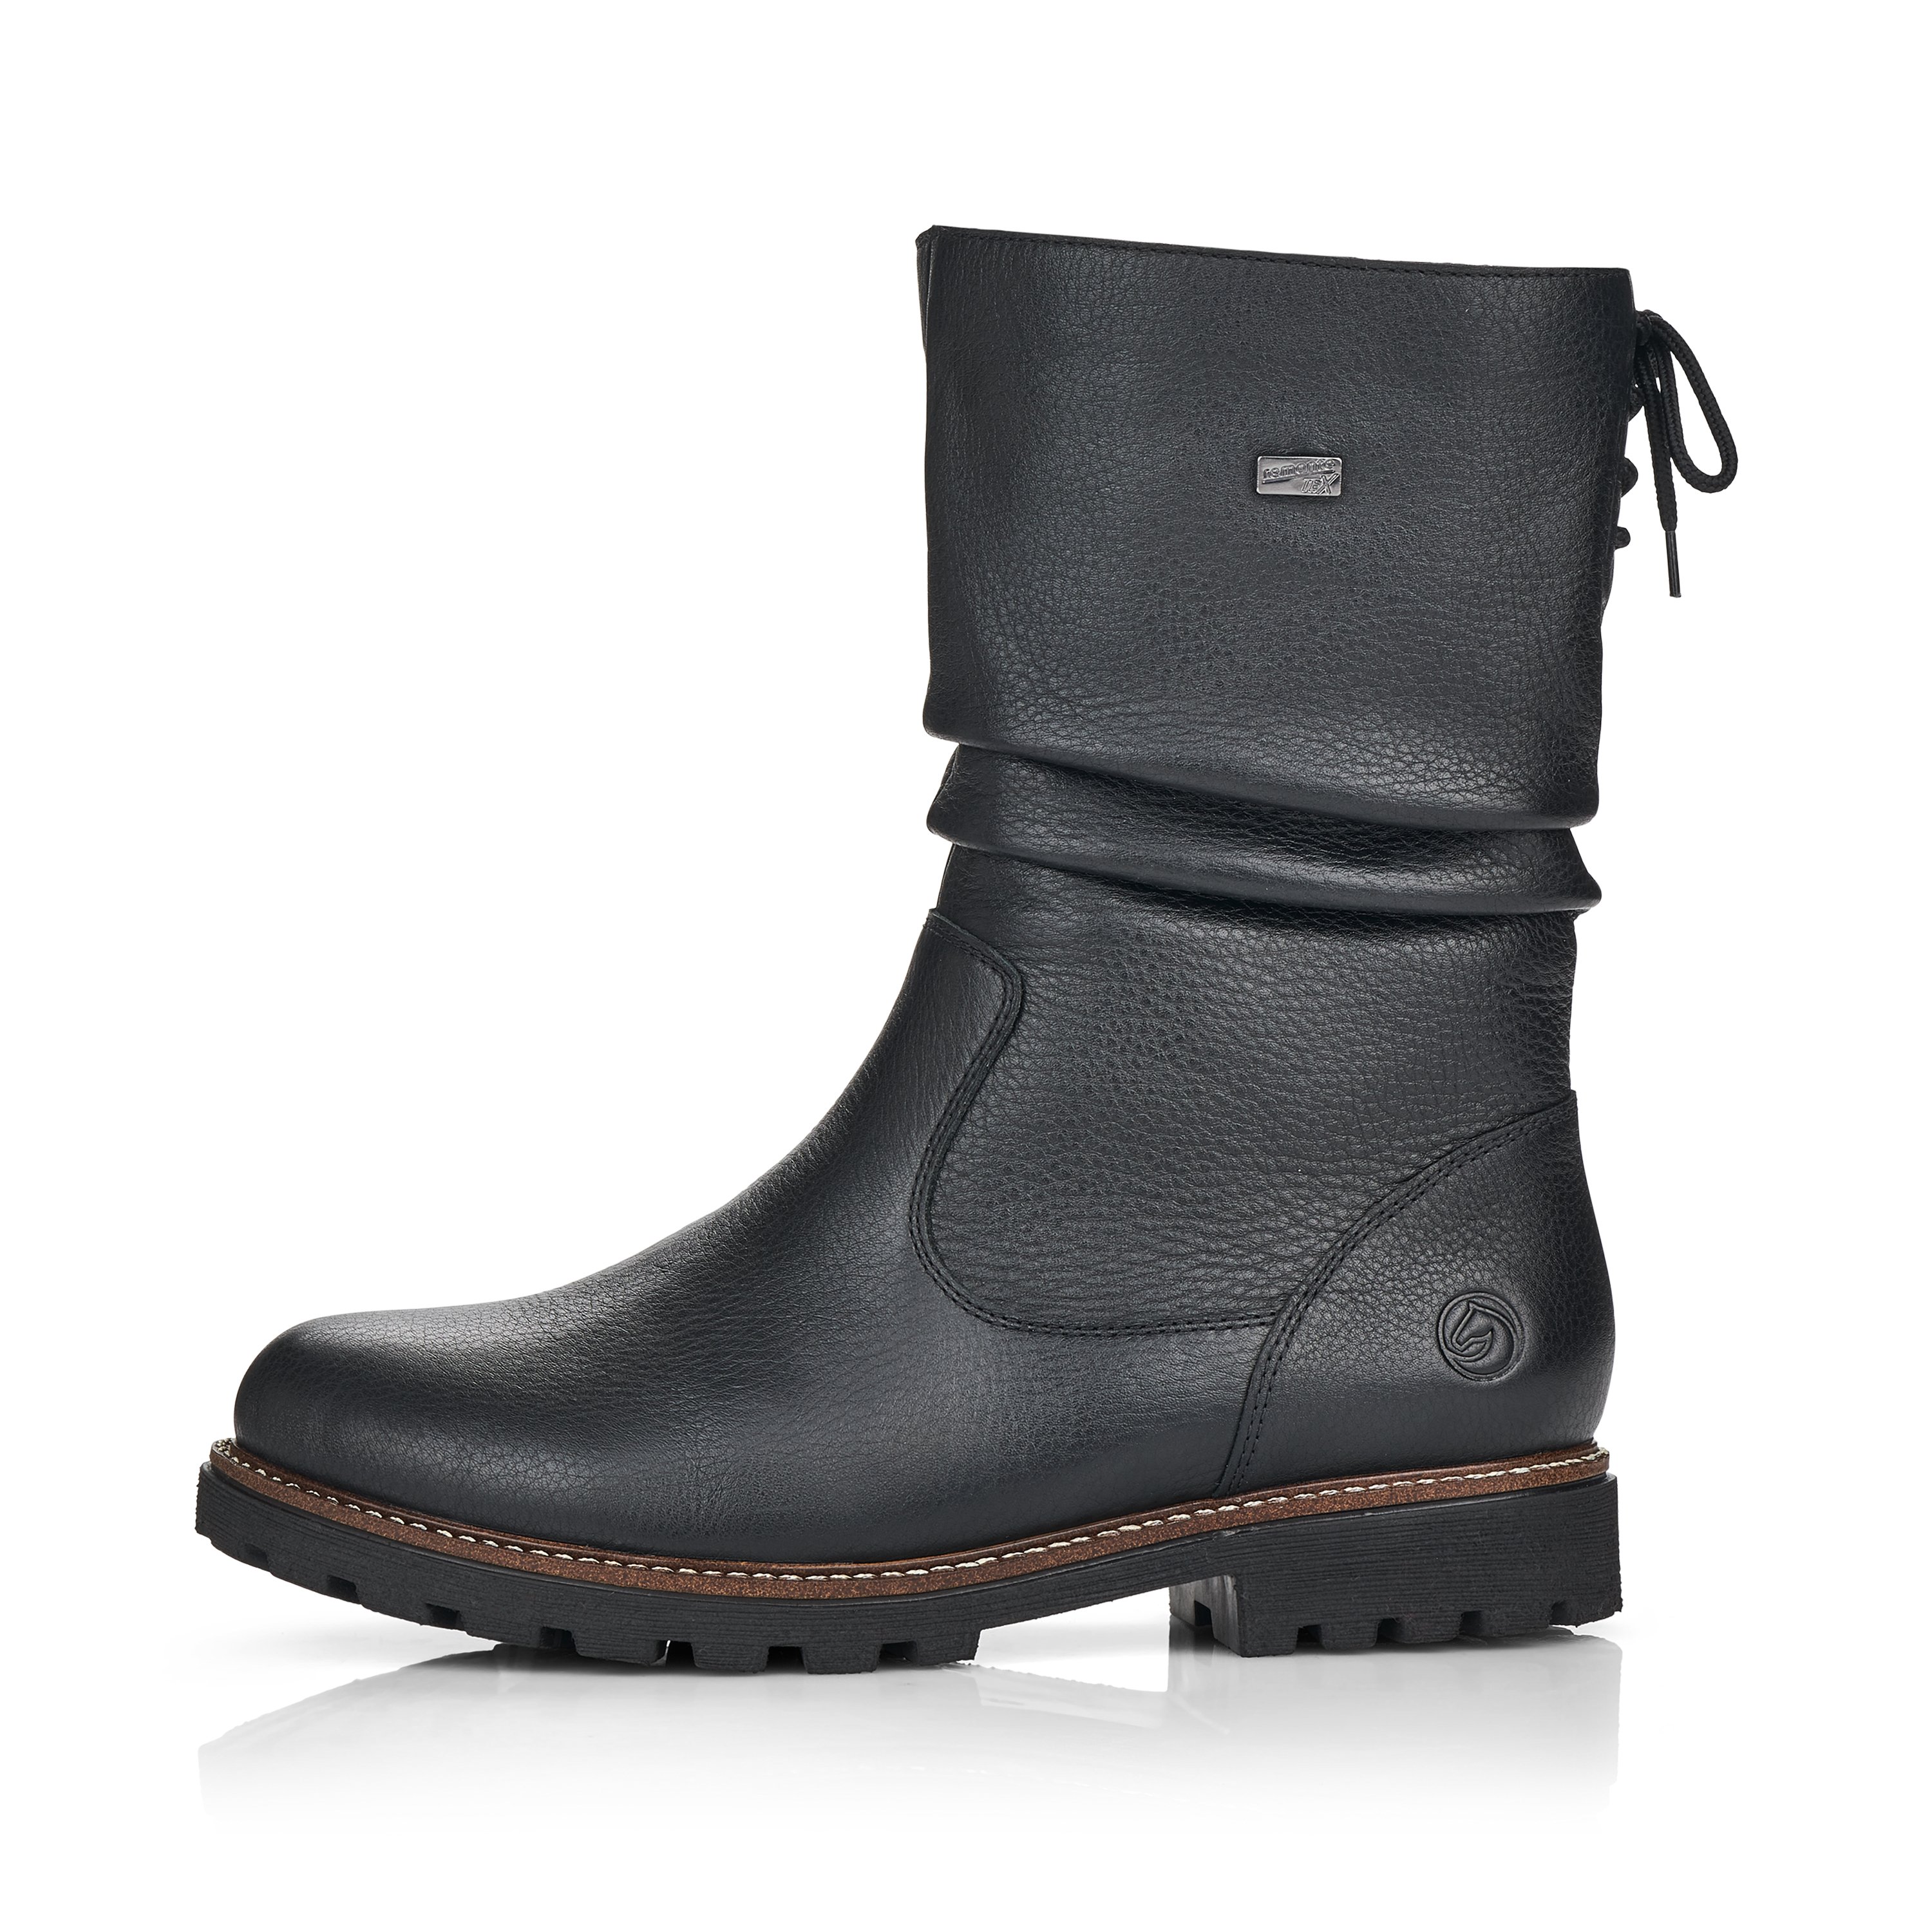 Black remonte women´s ankle boots D8477-01 with zipper as well as profile sole. The outside of the shoe